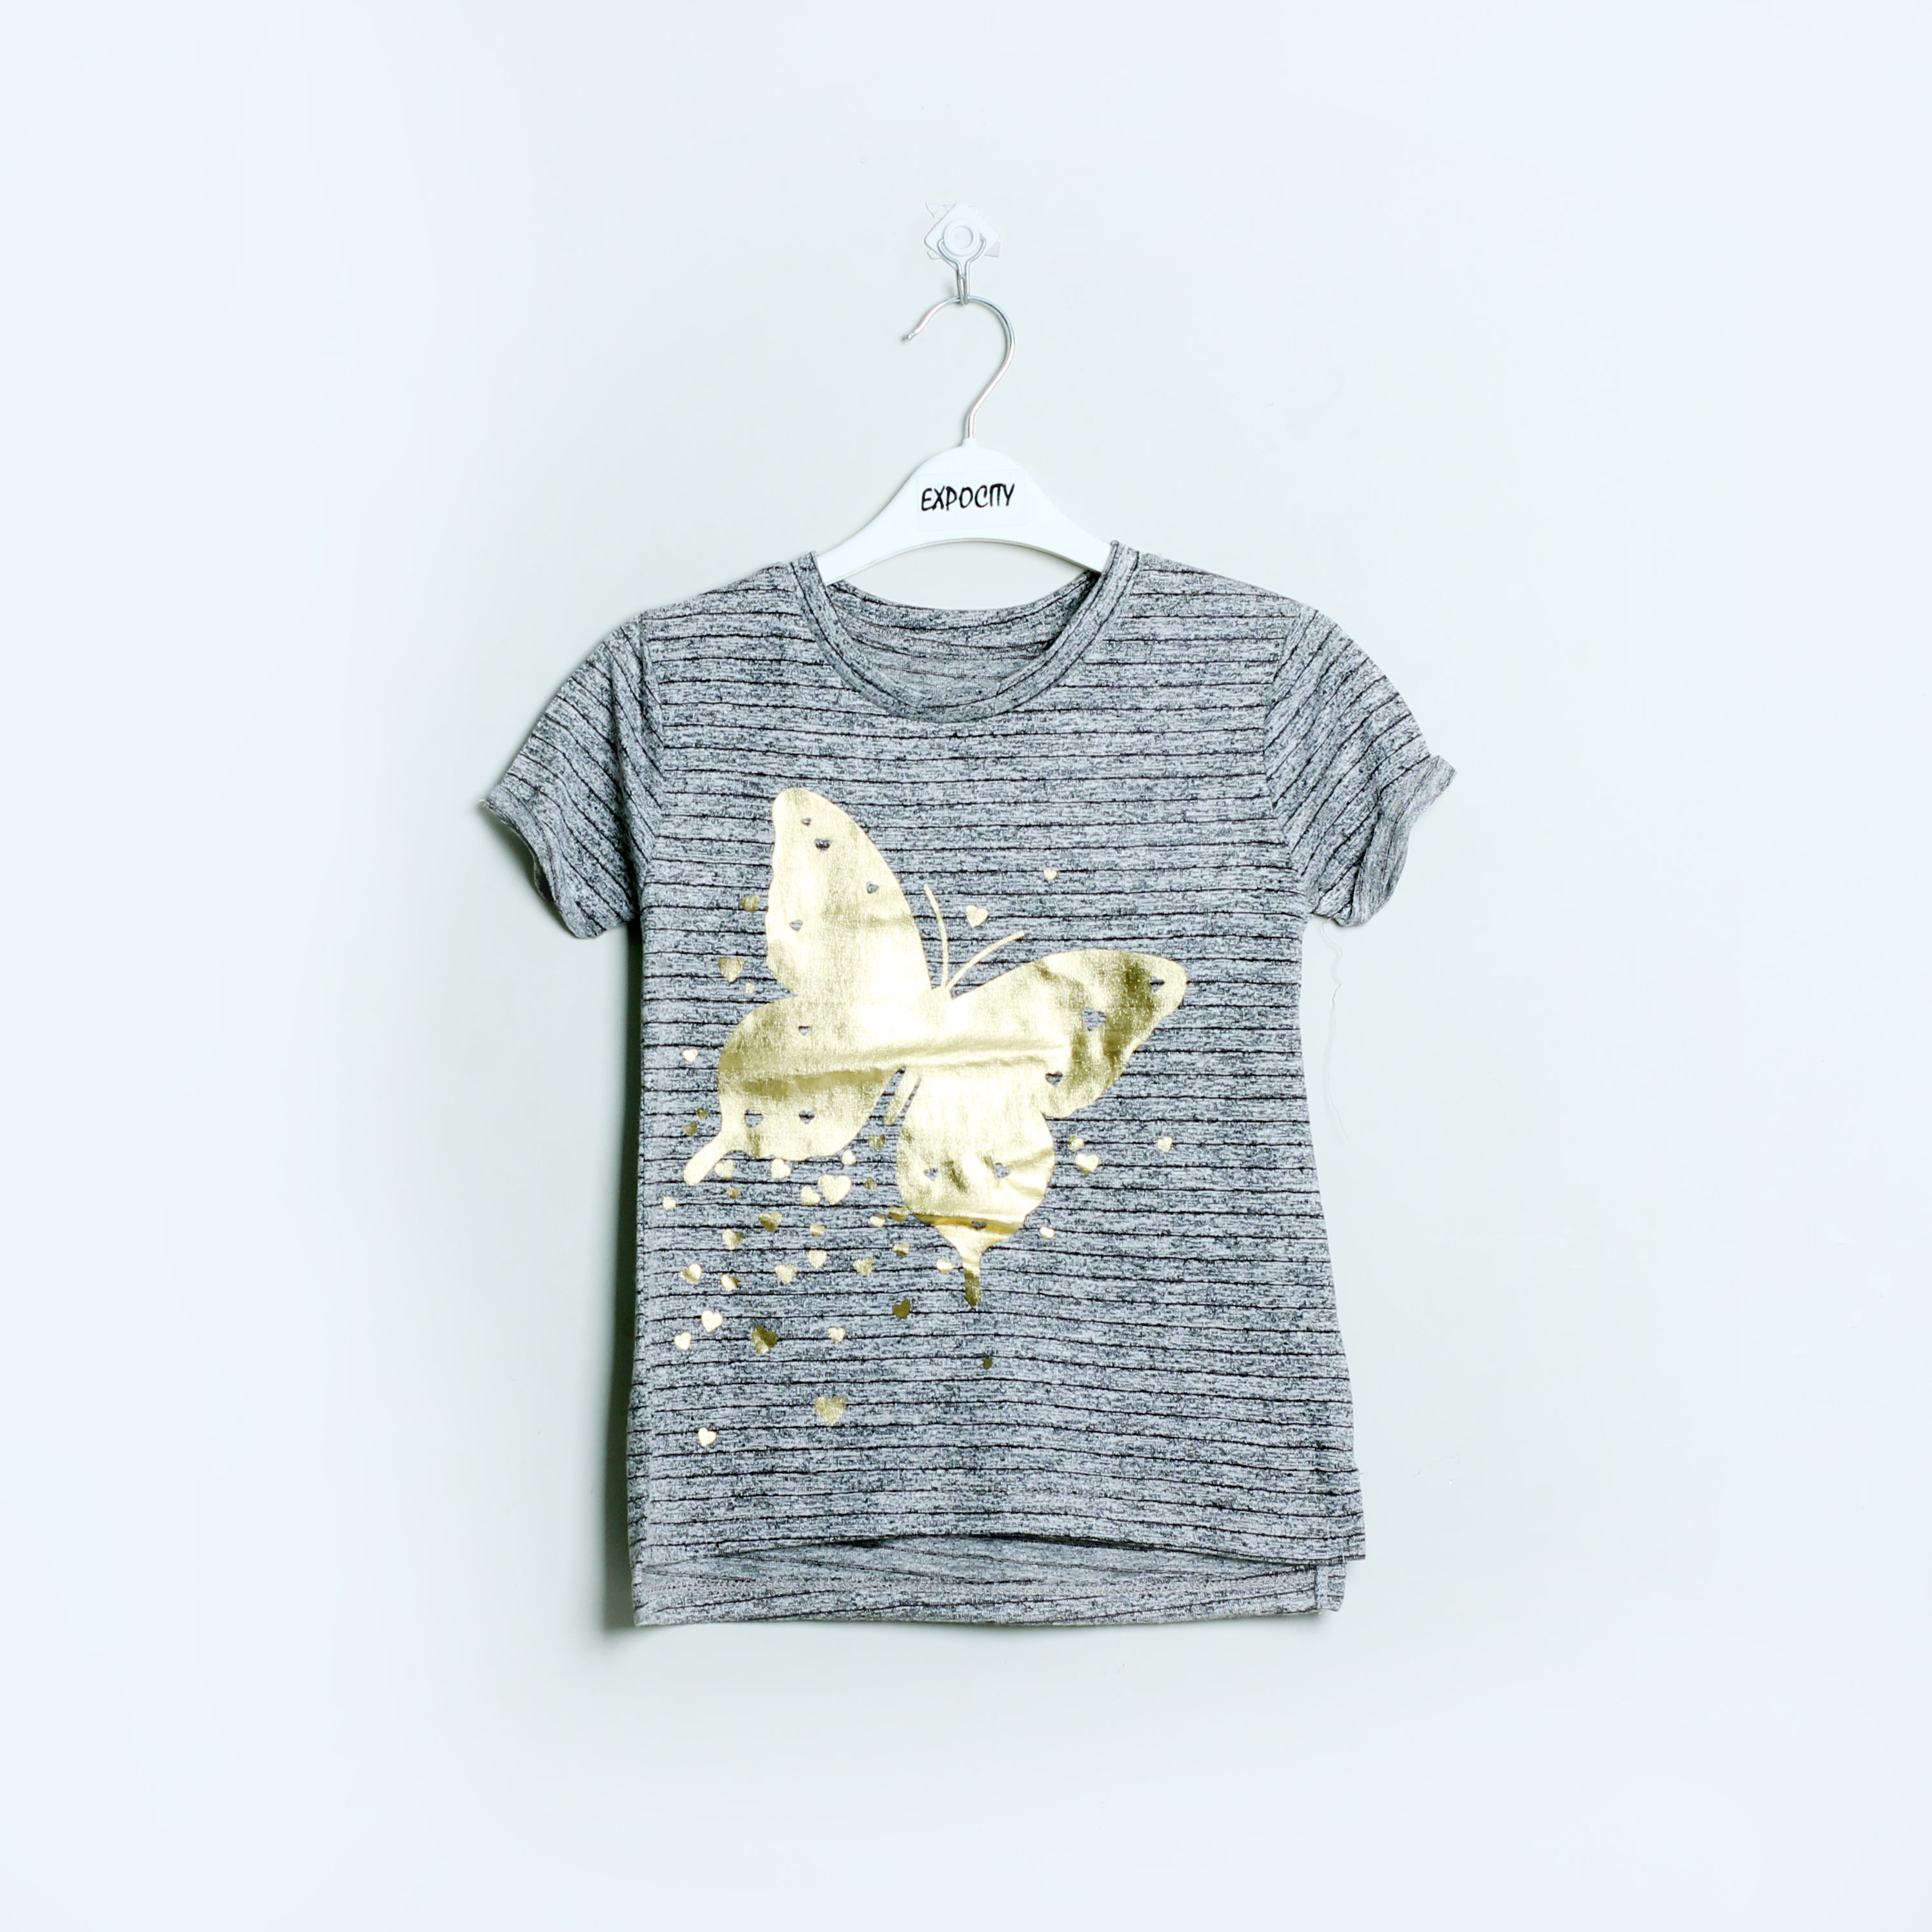 Grey Butterfly Printed Top - Expo City